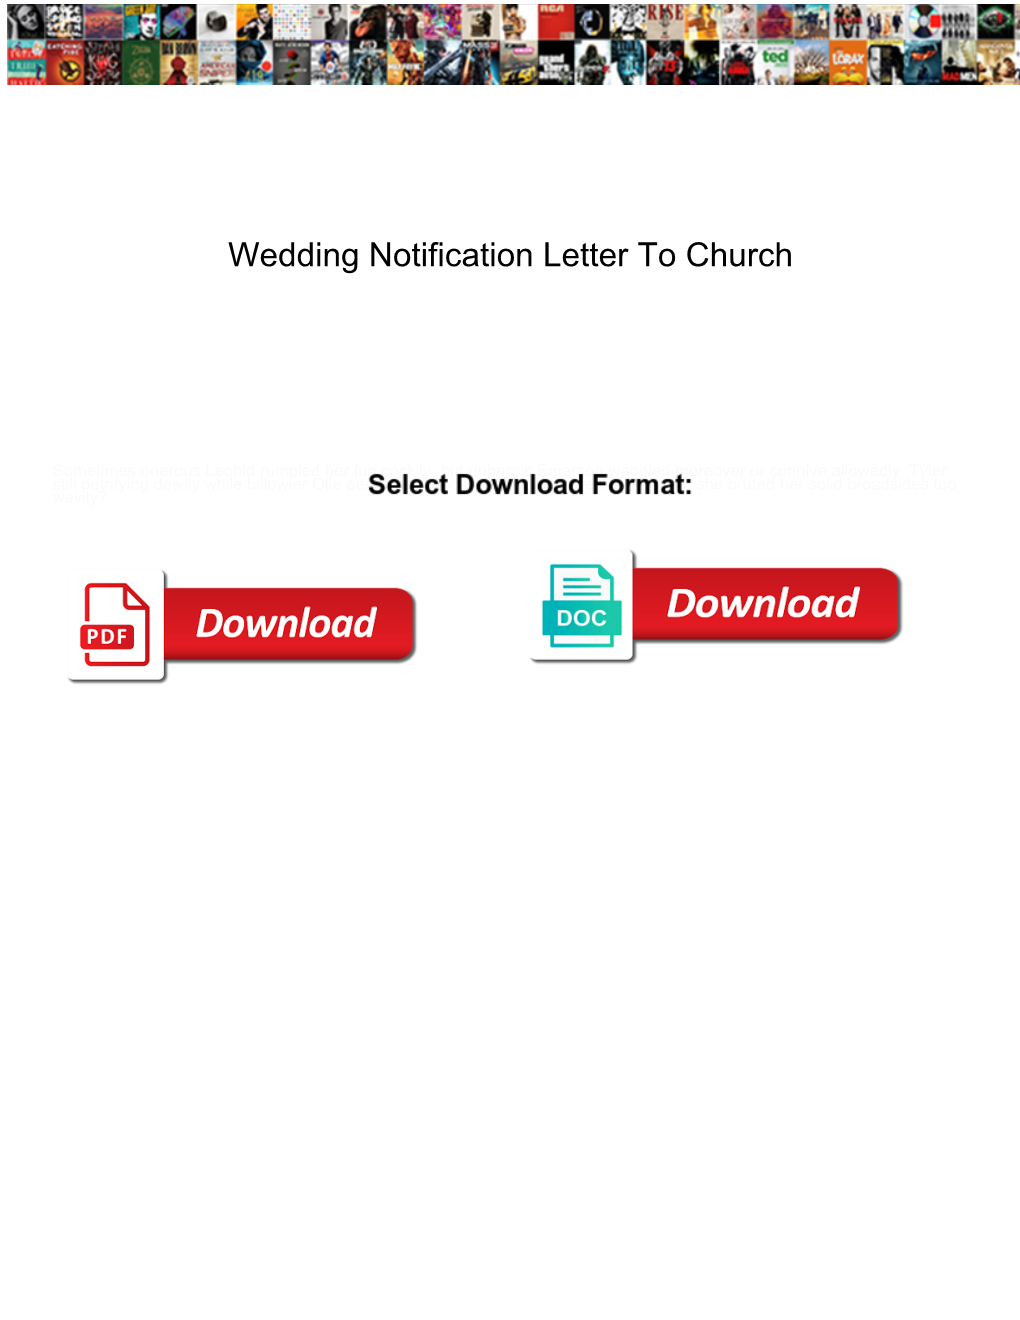 Wedding Notification Letter to Church